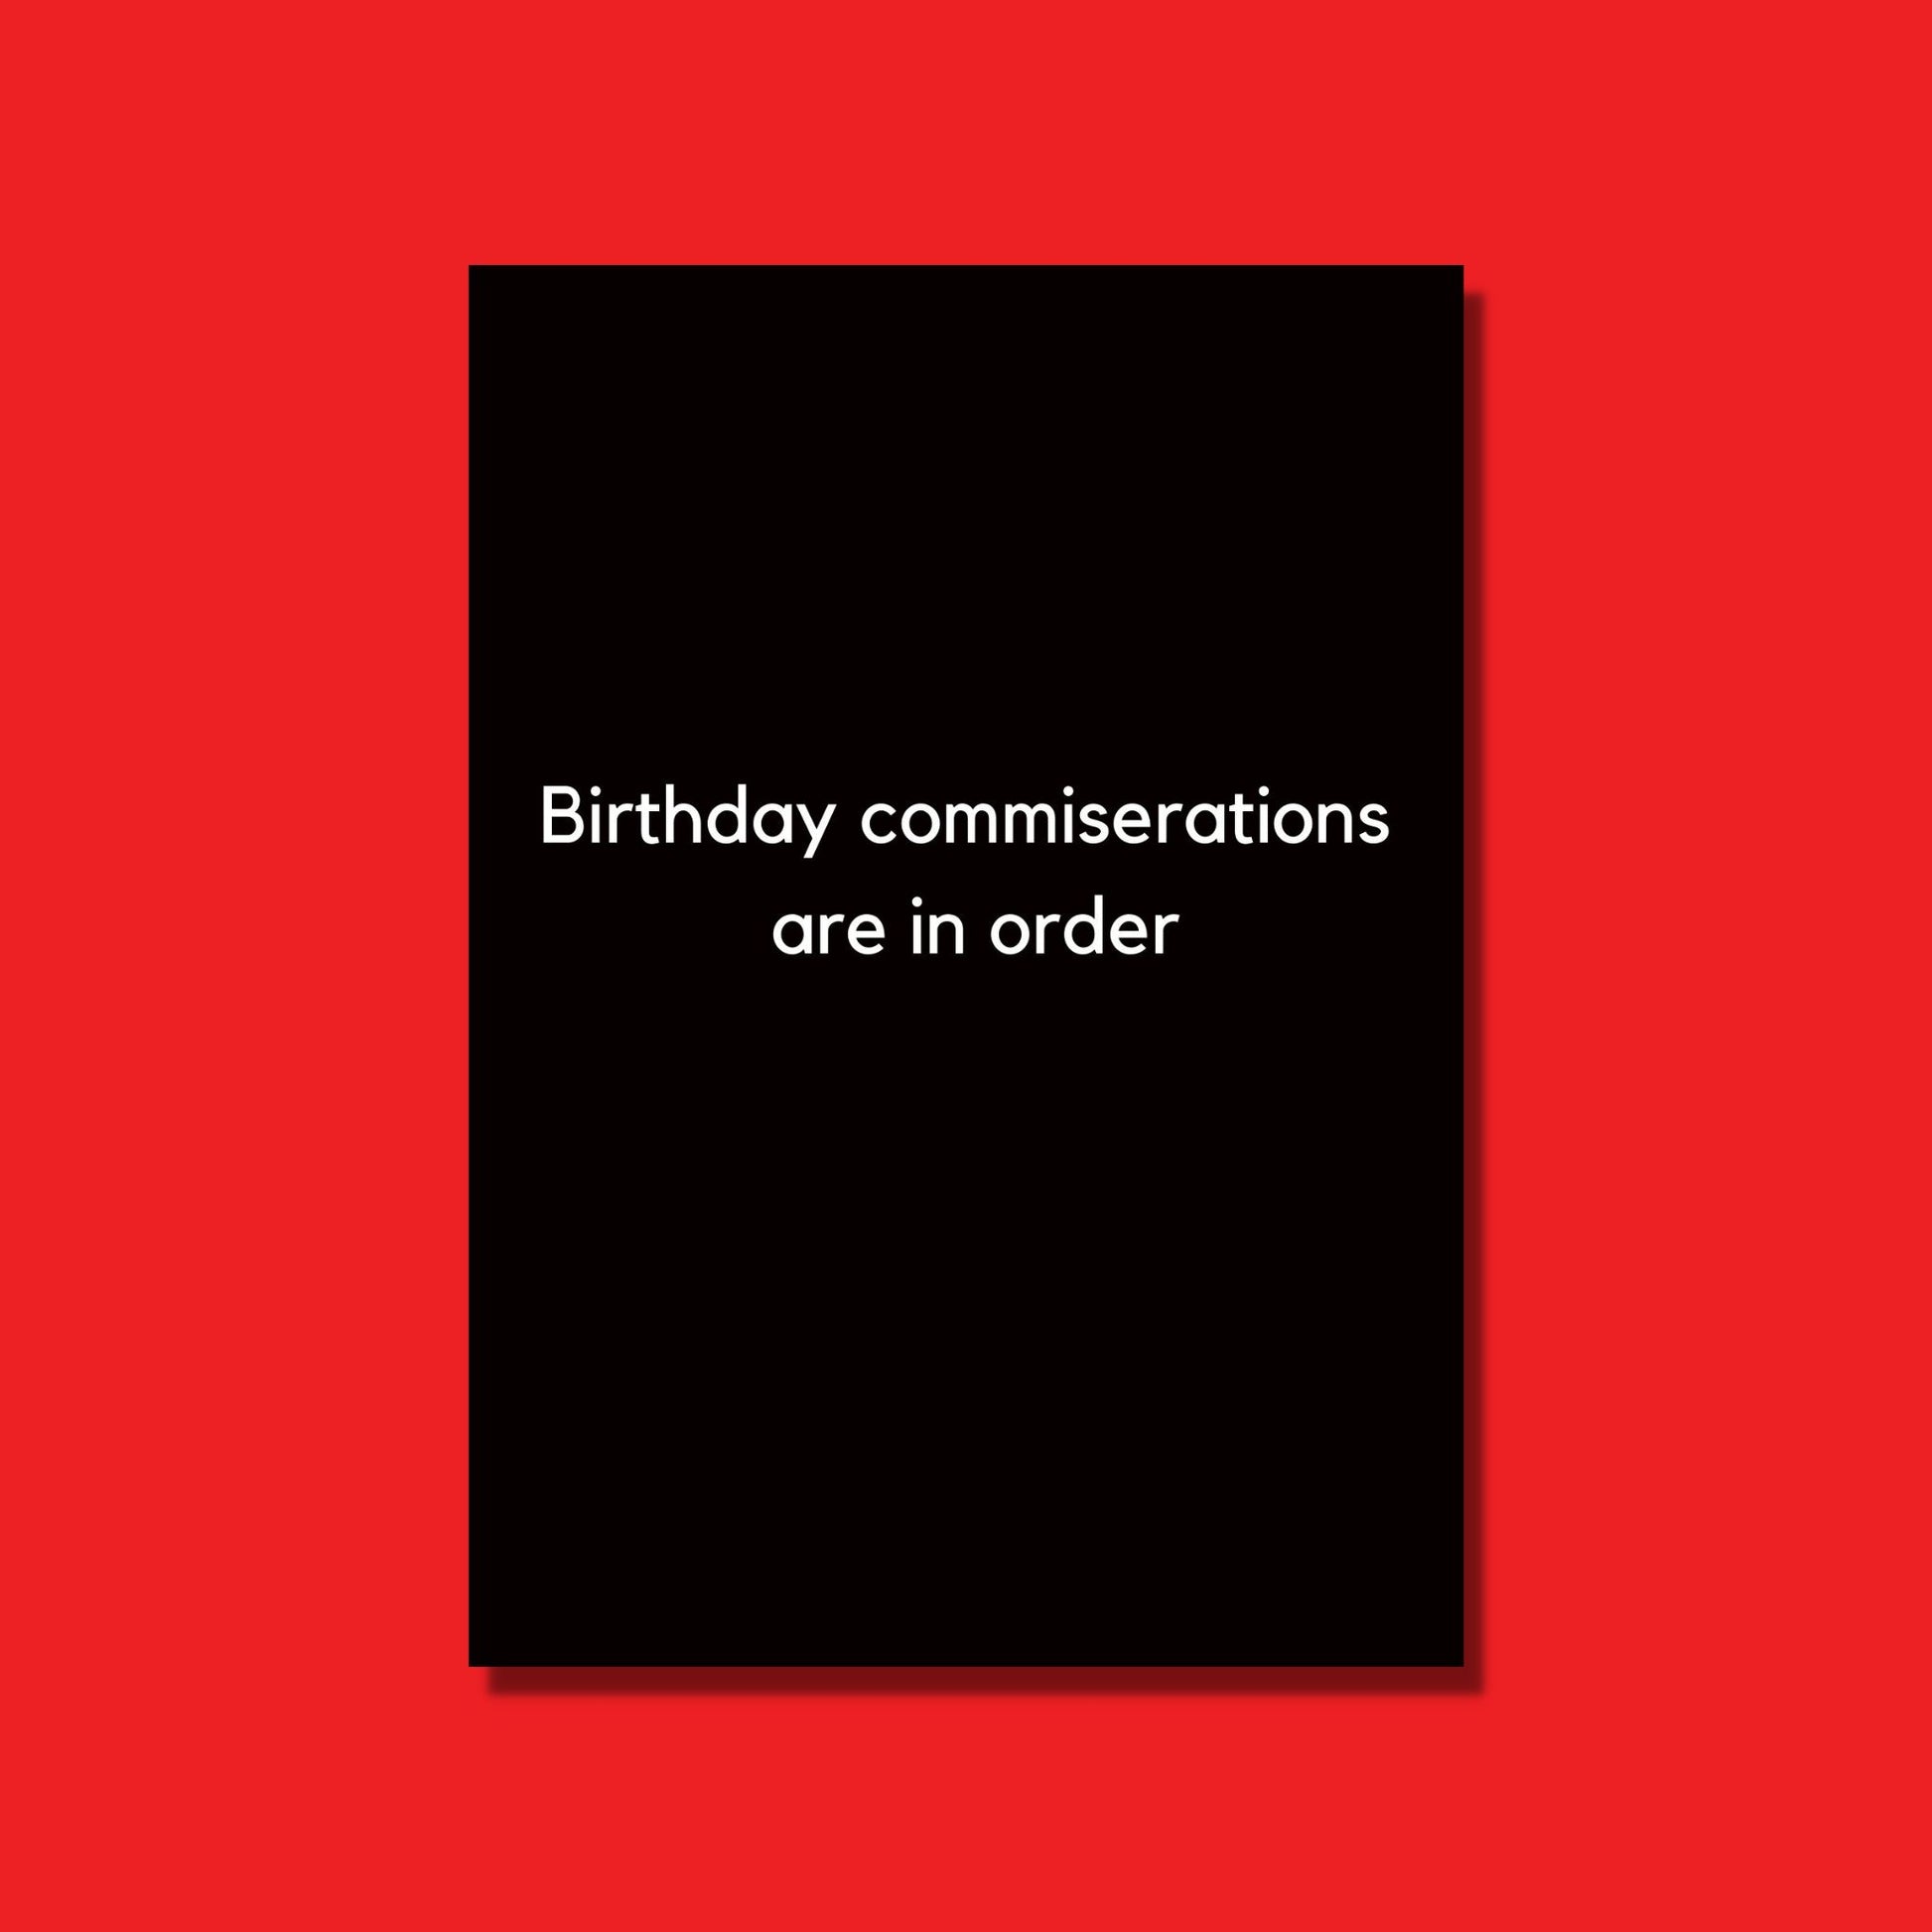 This is the perfect sarcastic birthday card that says "Birthday commiserations are in order".  It is a black card with white text.